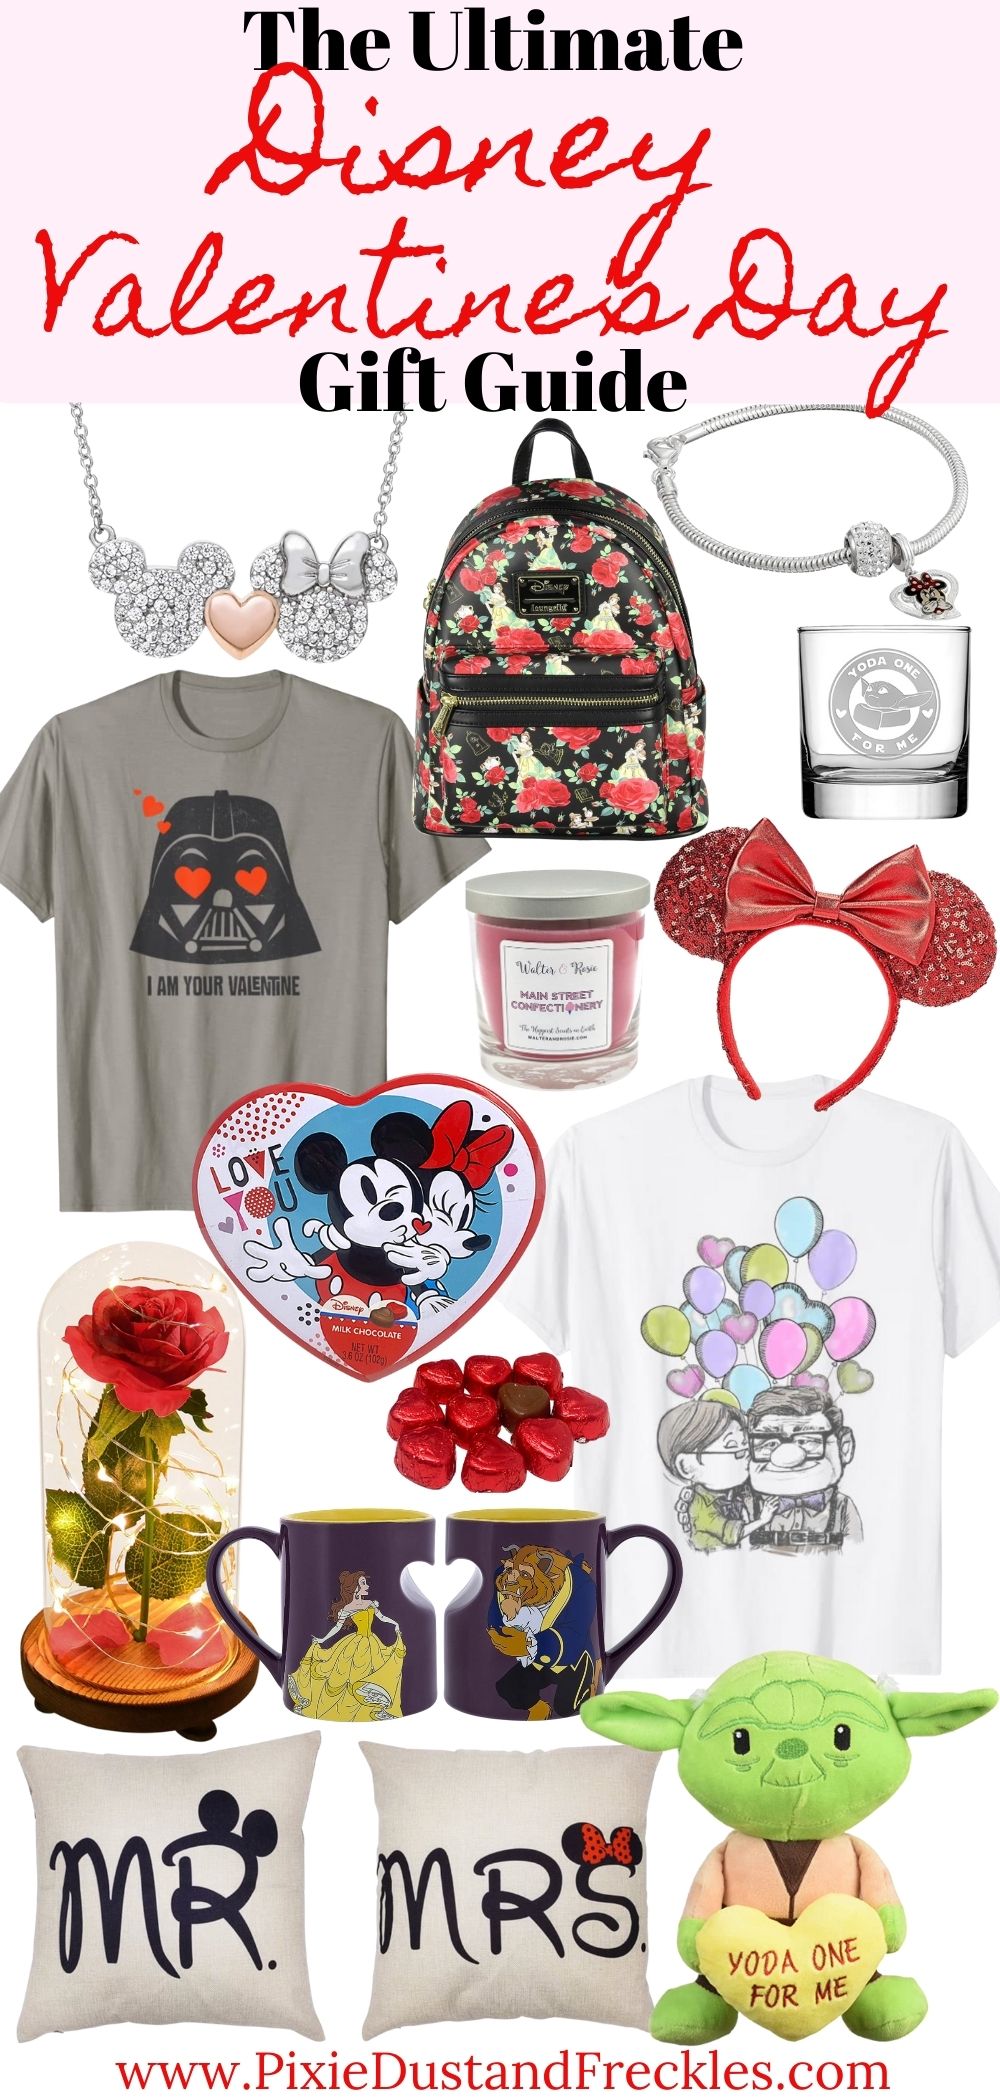 Unique gifts for the Disney Lover - Disney in your Day